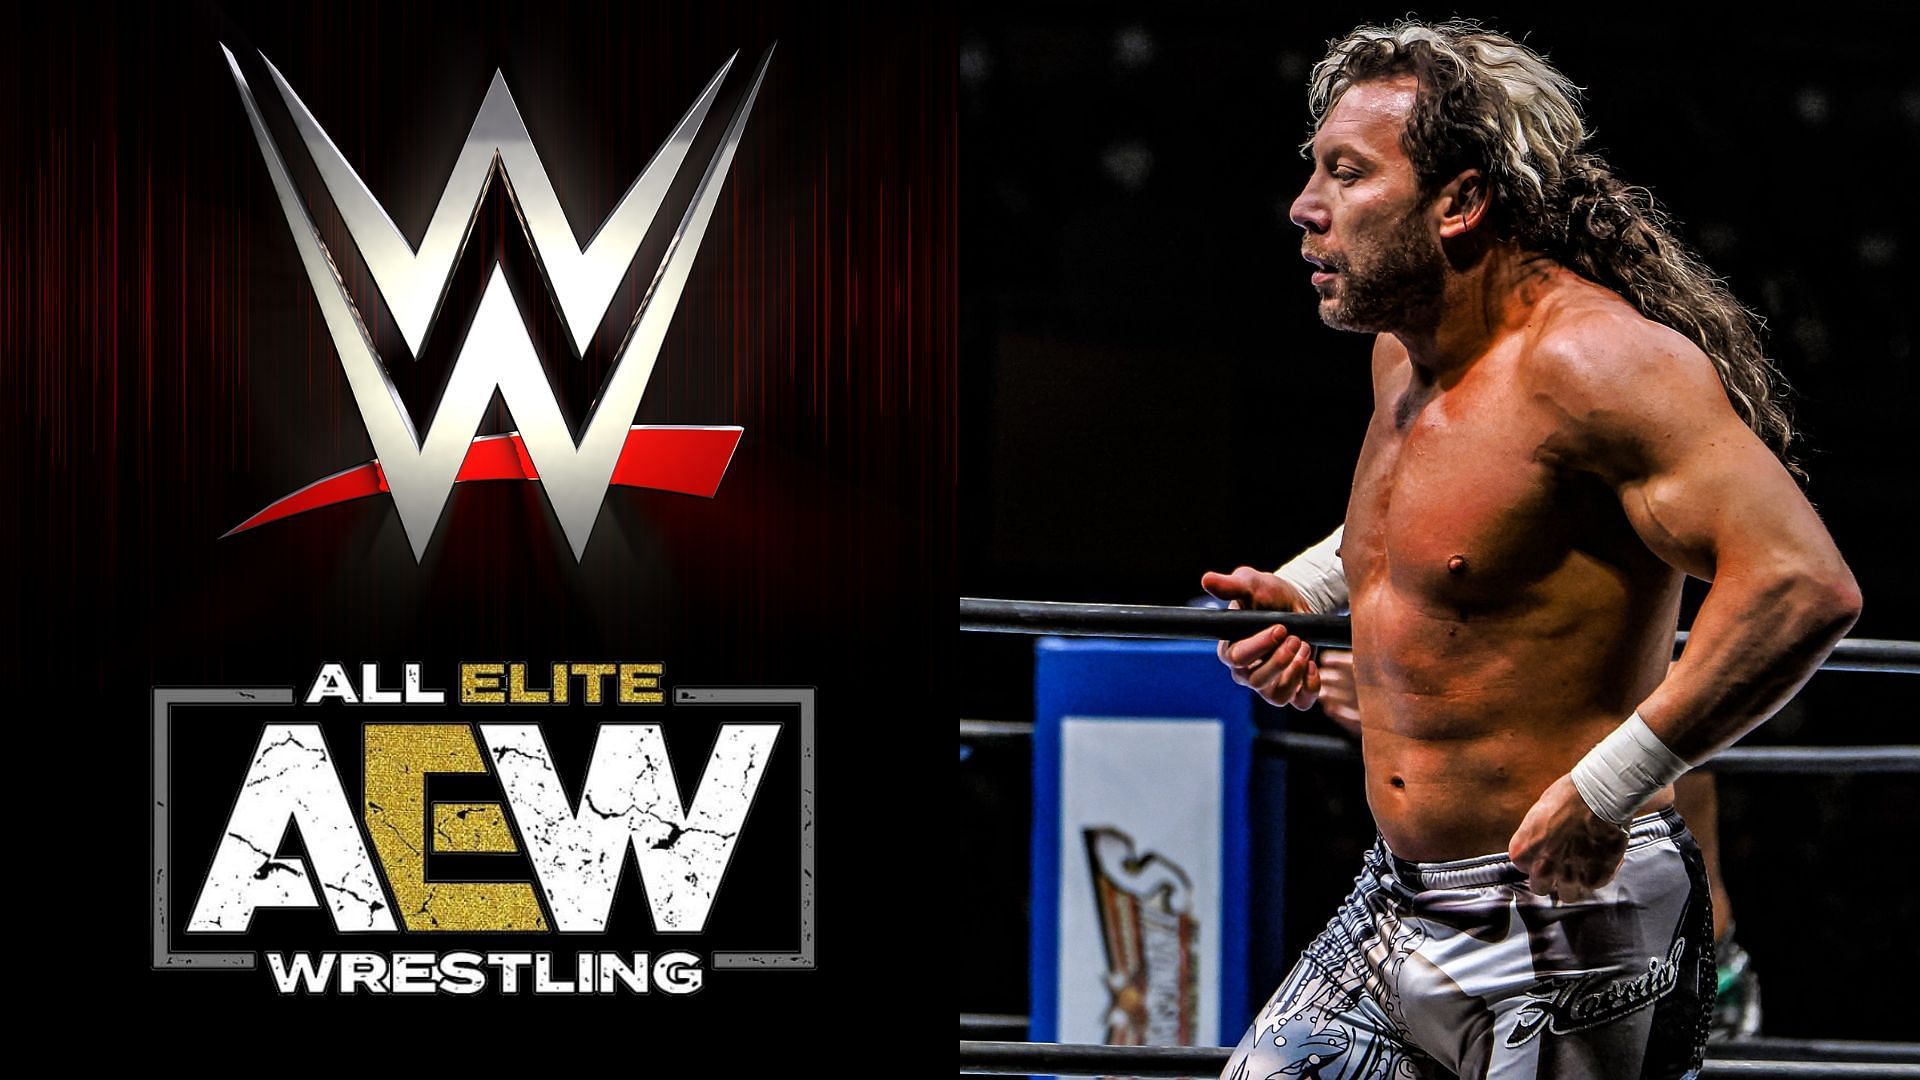 WWE and AEW logos (left), Kenny Omega (right)